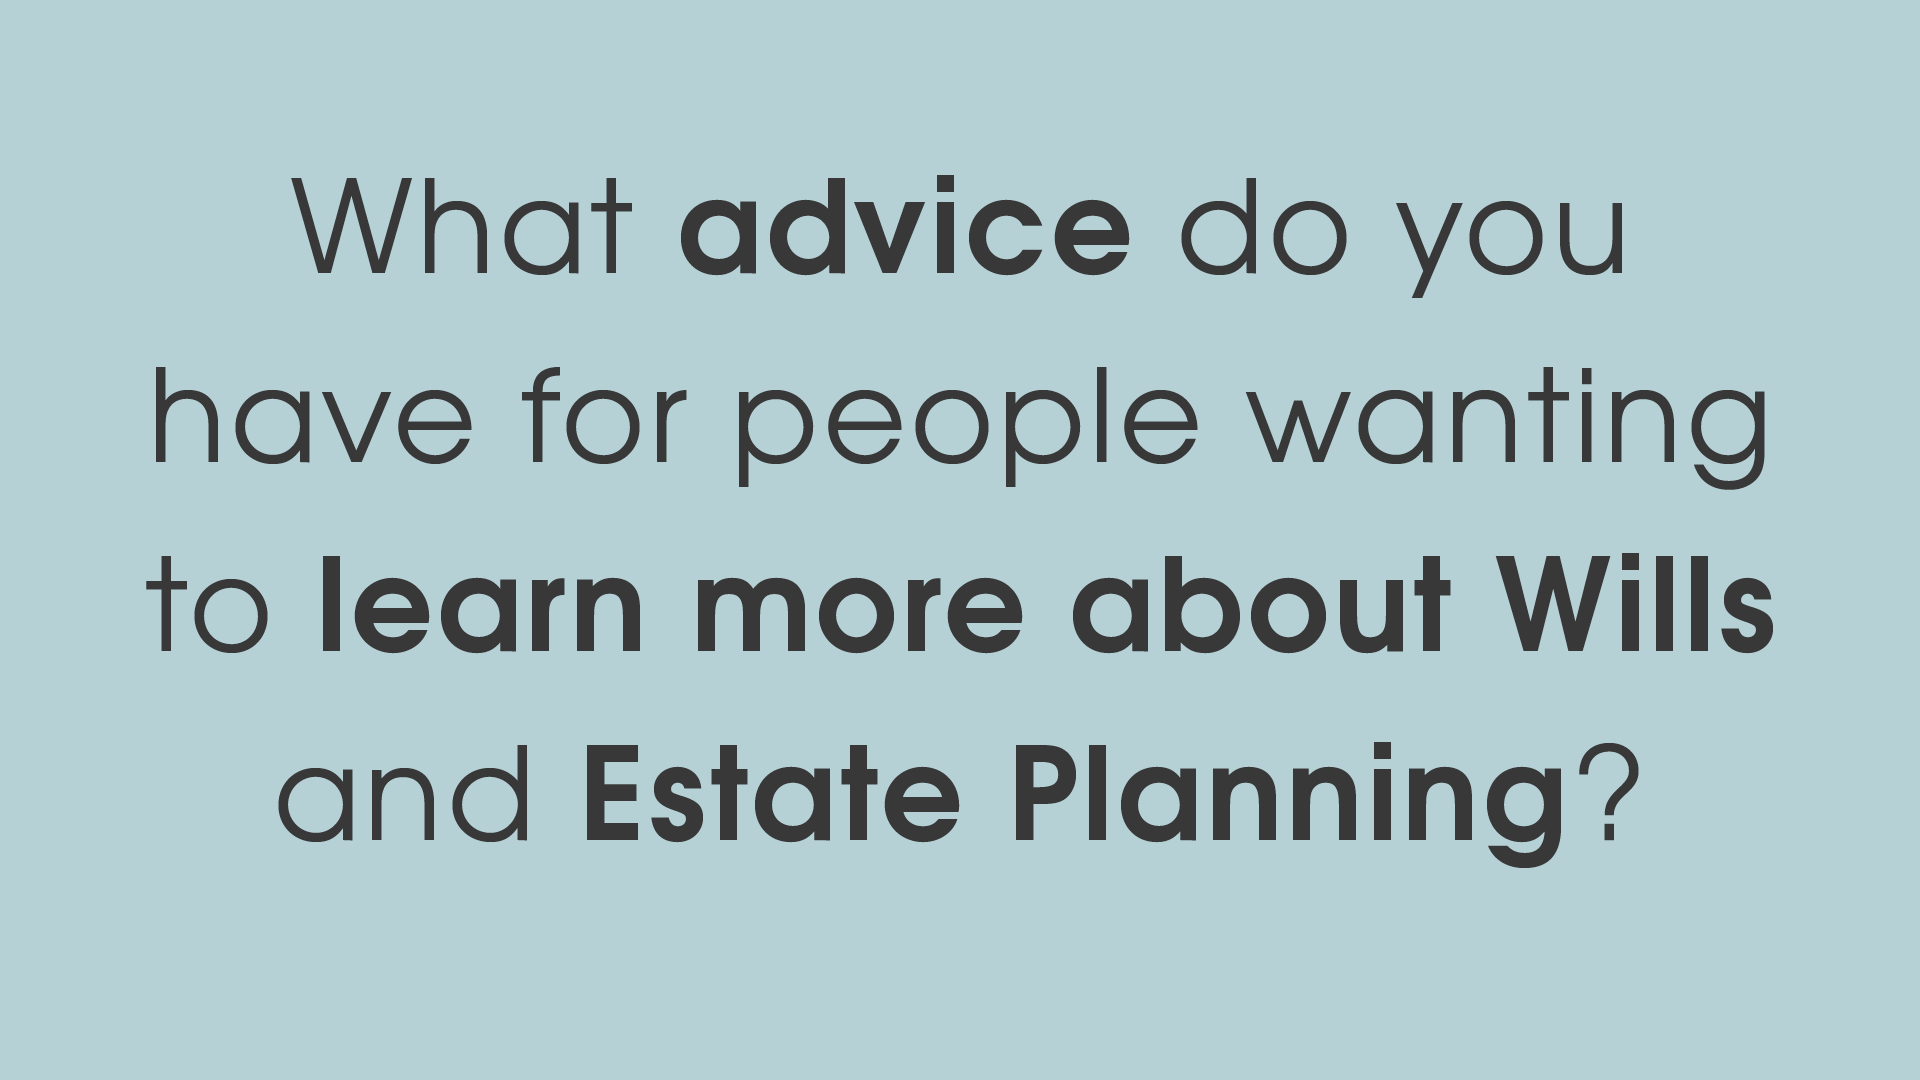 Family lawyer article video - What advice do you have for people wanting to learn more about wills and estate planning